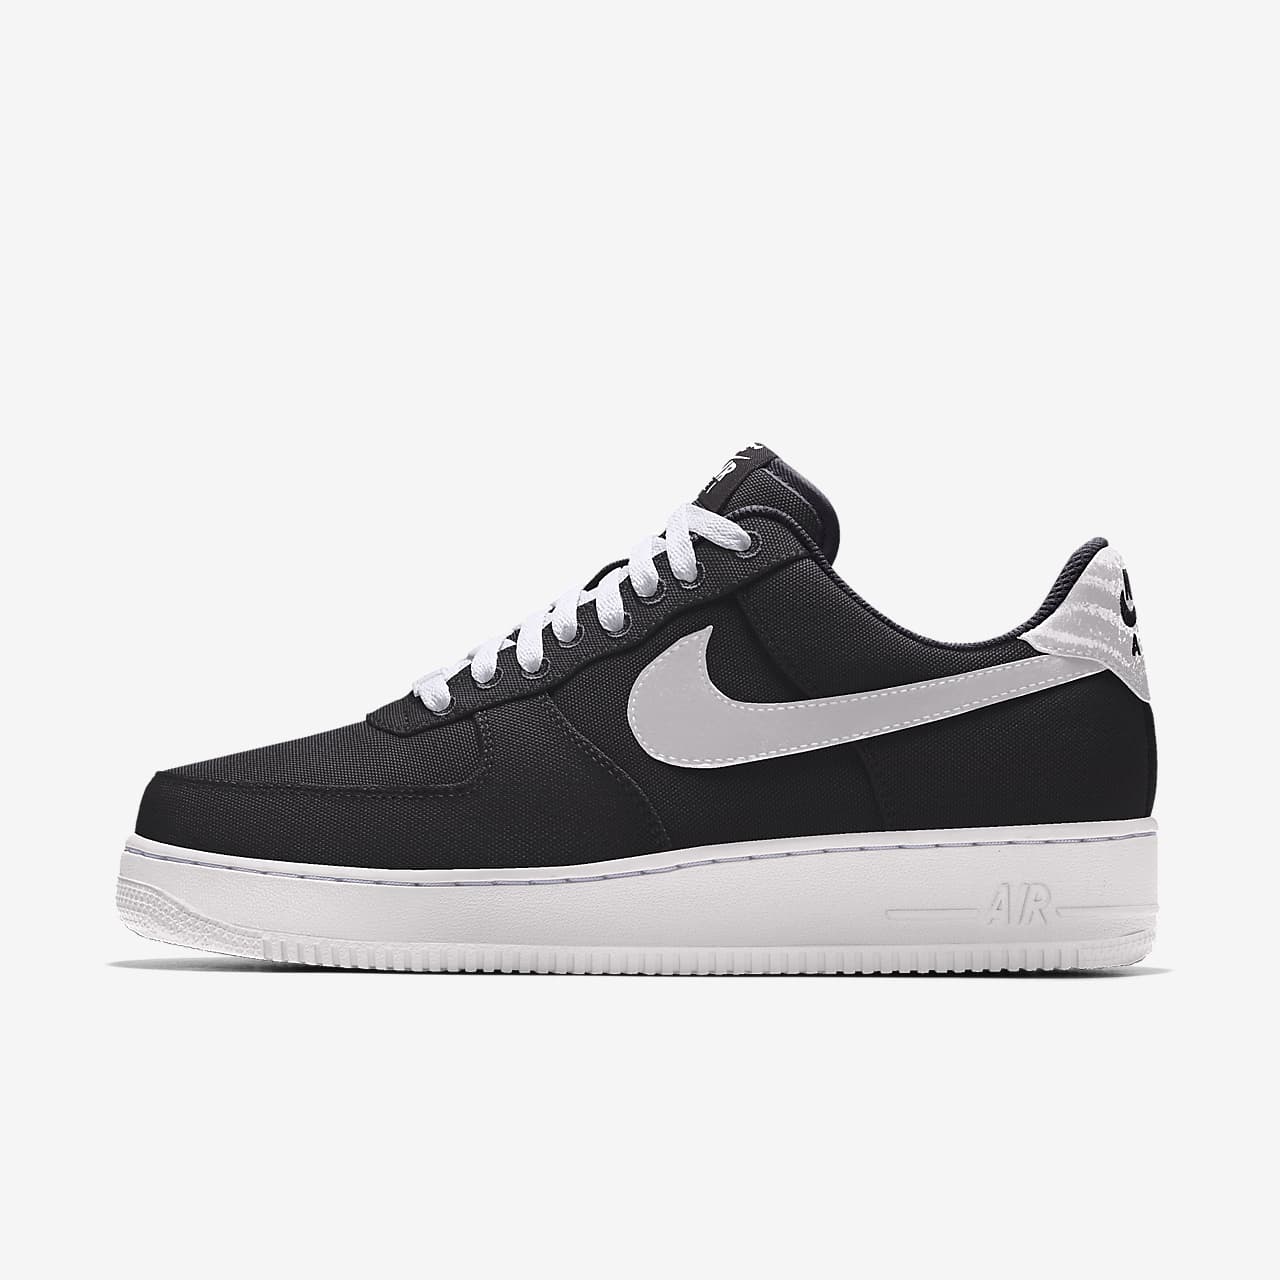 Chaussure personnalisable Nike Air Force 1 Low By You pour femme